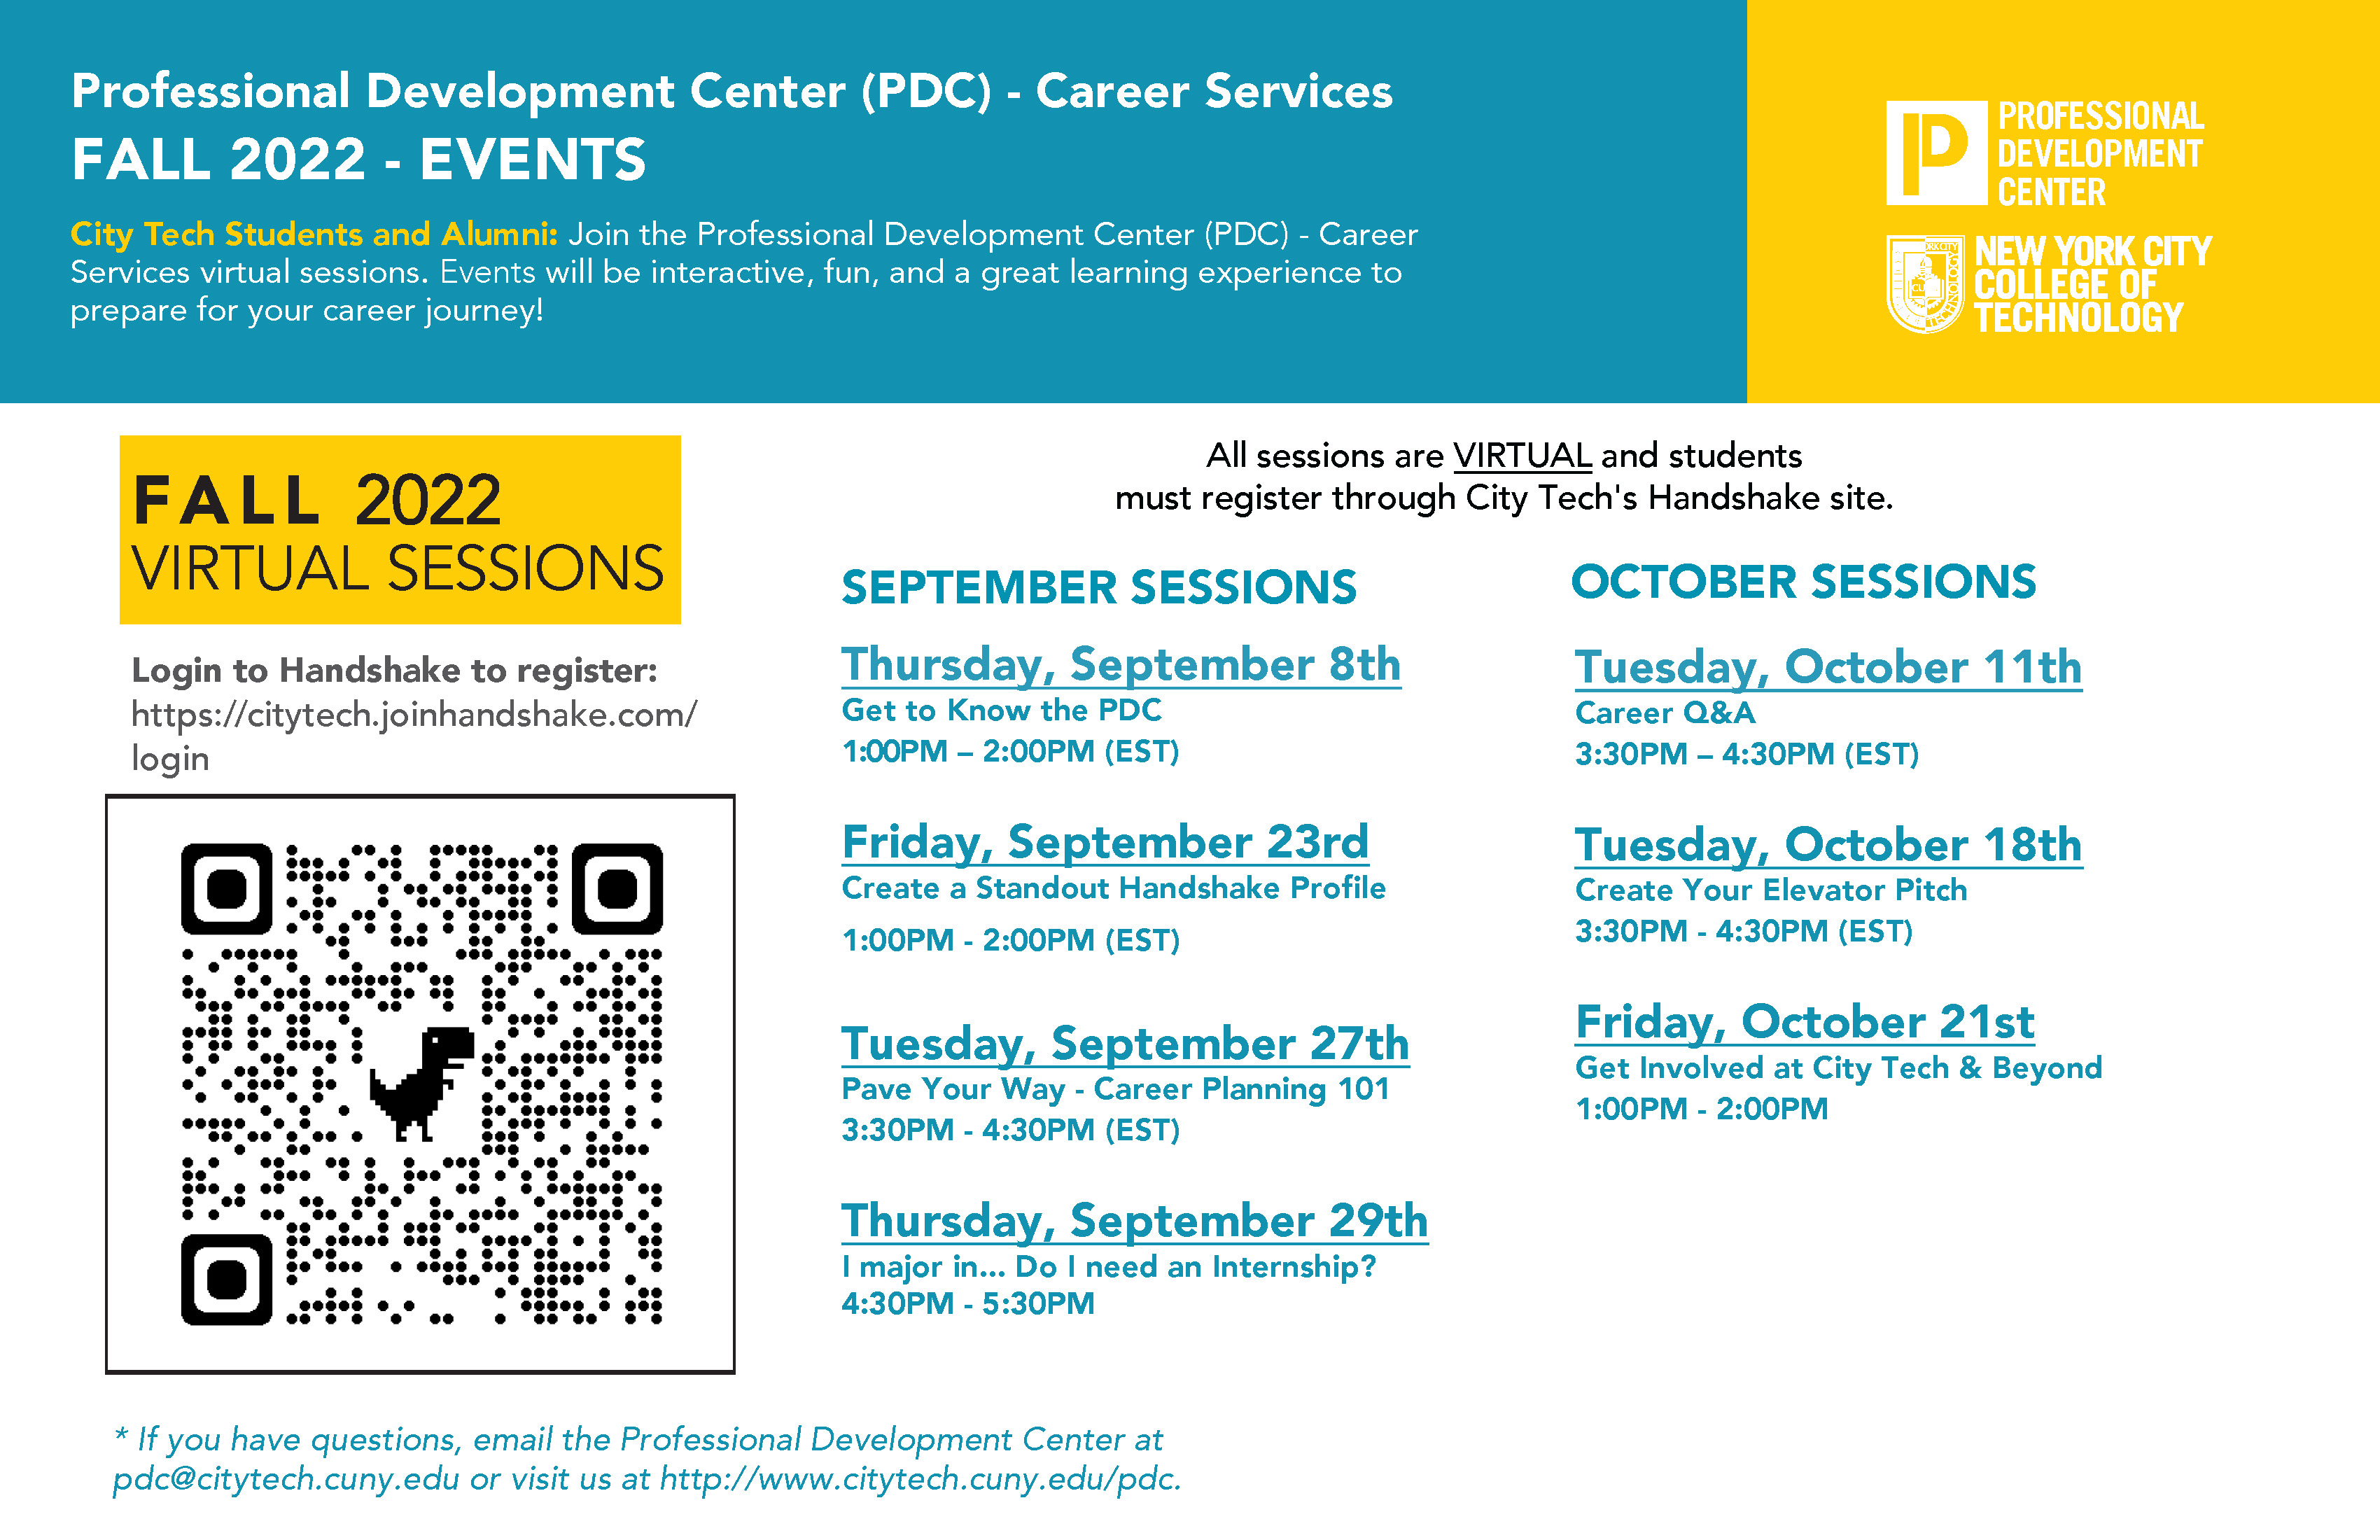 PDC Fall 2022 Events